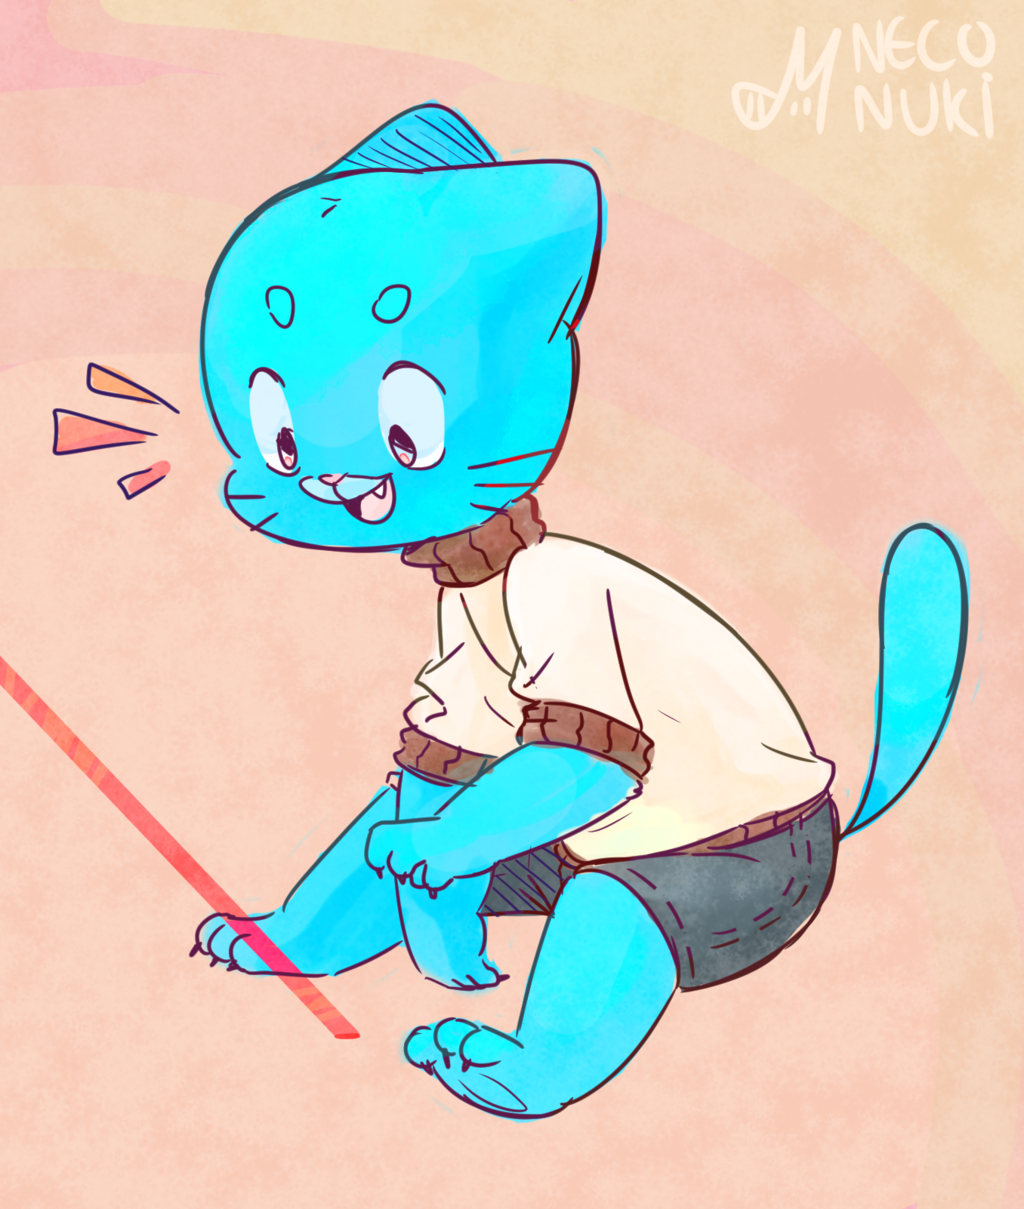 Most recent image: Even More Gumball